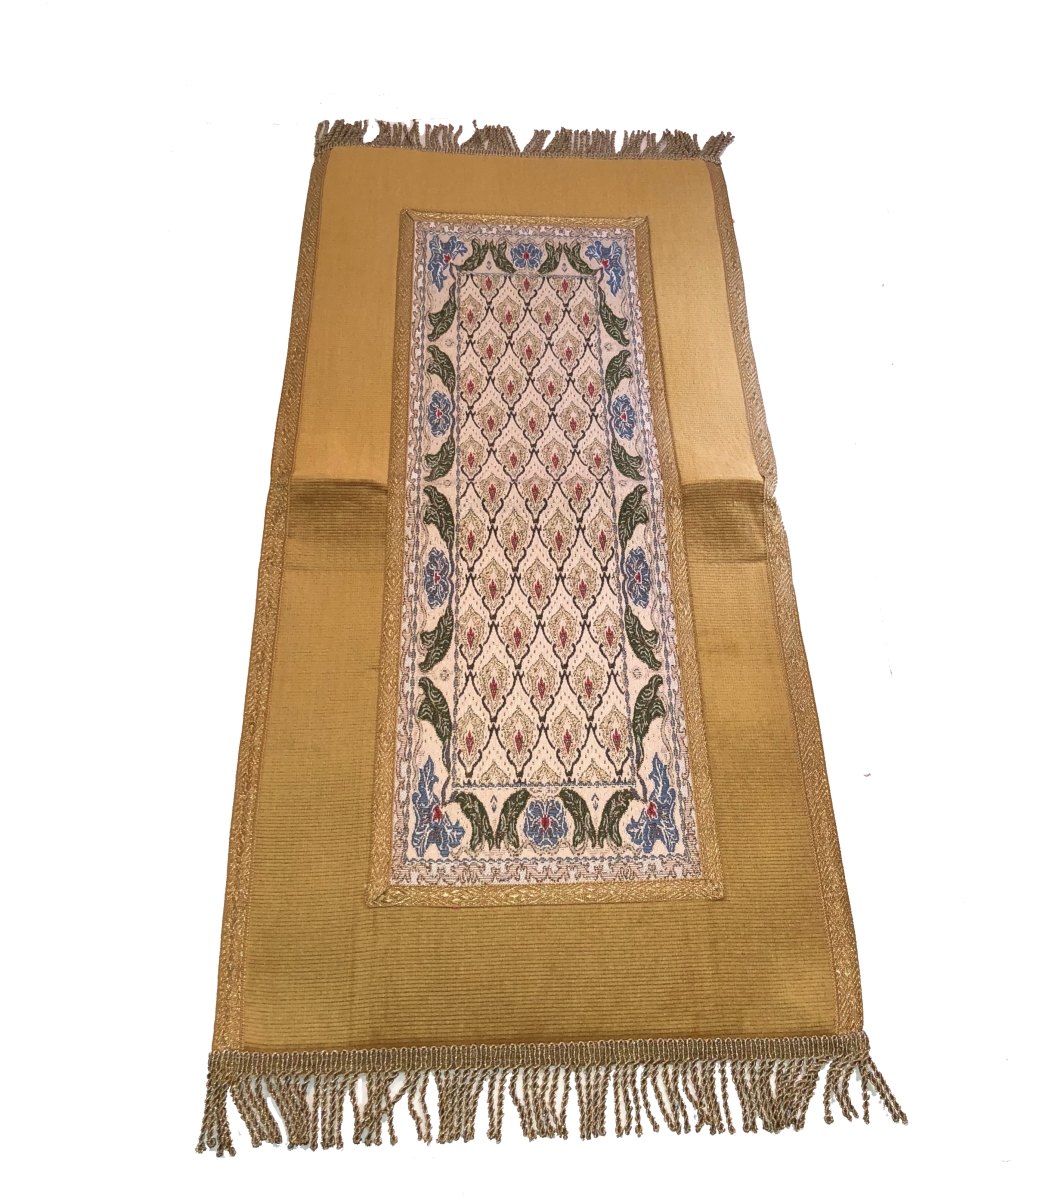 Fou1260gld 12 X 60 Belgium Fouquete Table Runner, Gold